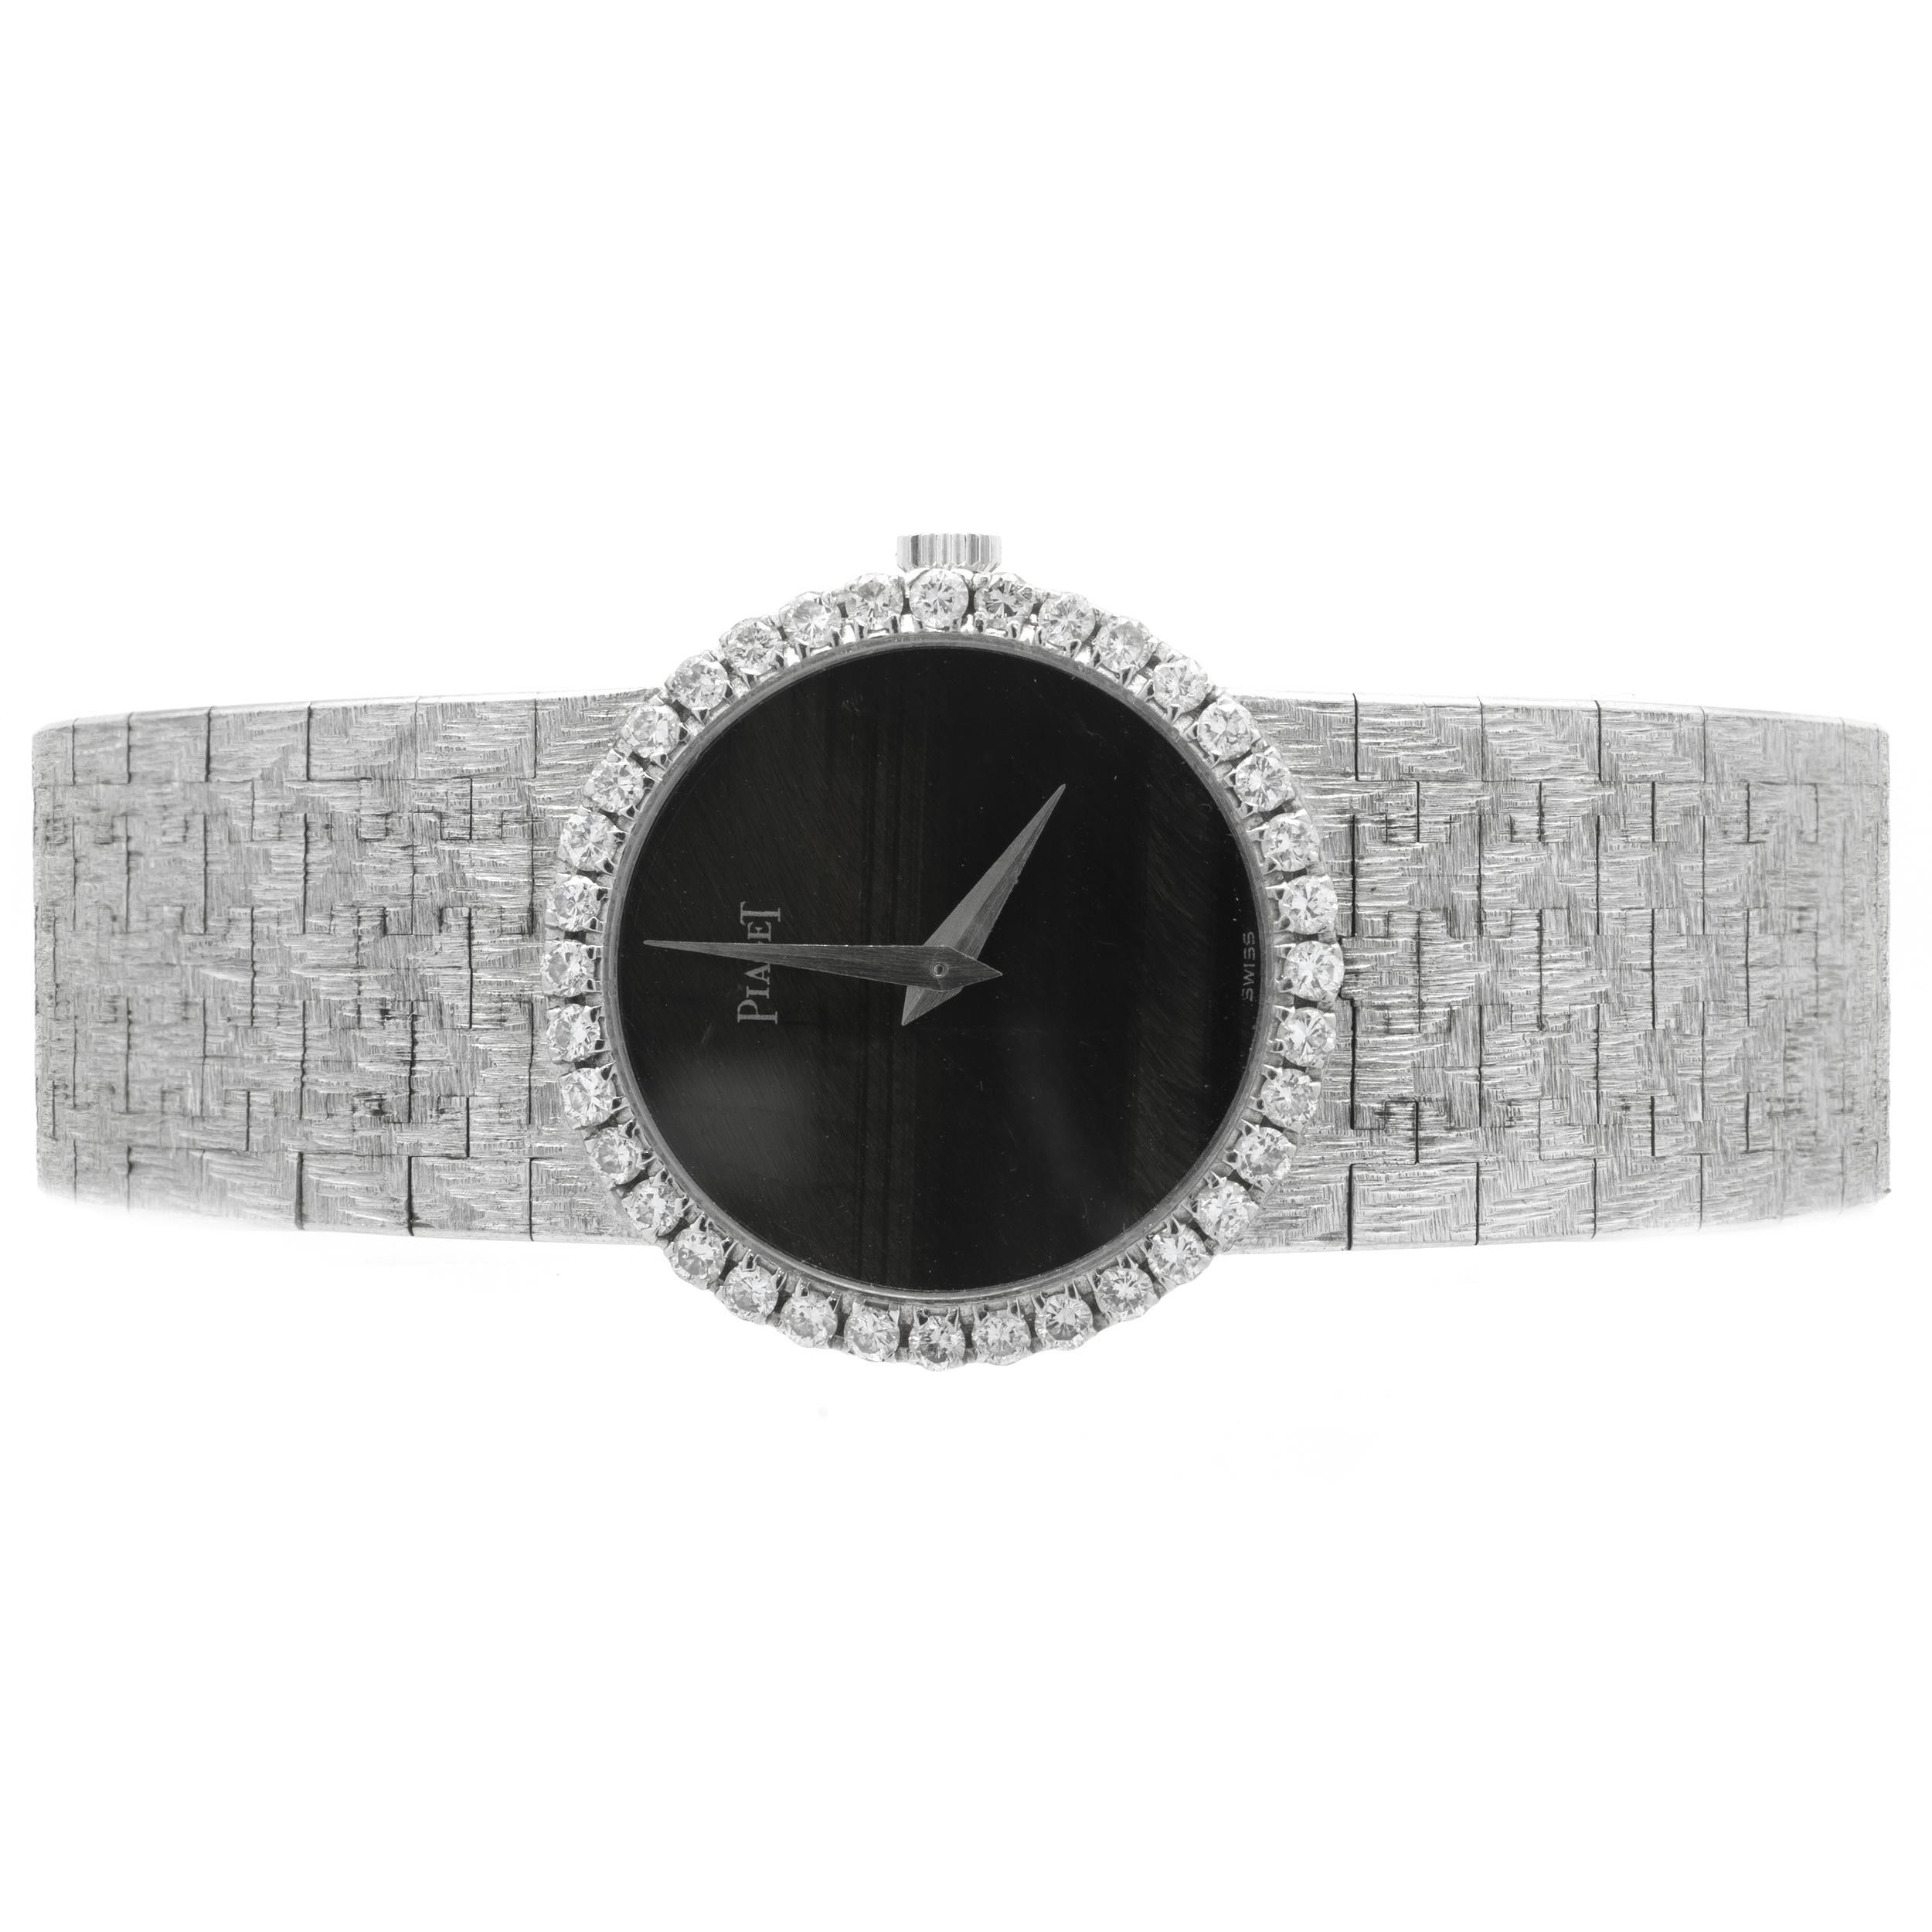 Movement: quartz
Function: hours, minutes
Case: 24mm 18K white gold case, diamond bezel,  scratch-resistant sapphire crystal, push/pull crown
Band: 18K white gold mesh bracelet
Dial: black tigers eye
Serial: 14XXX


Does Not Come with Box or